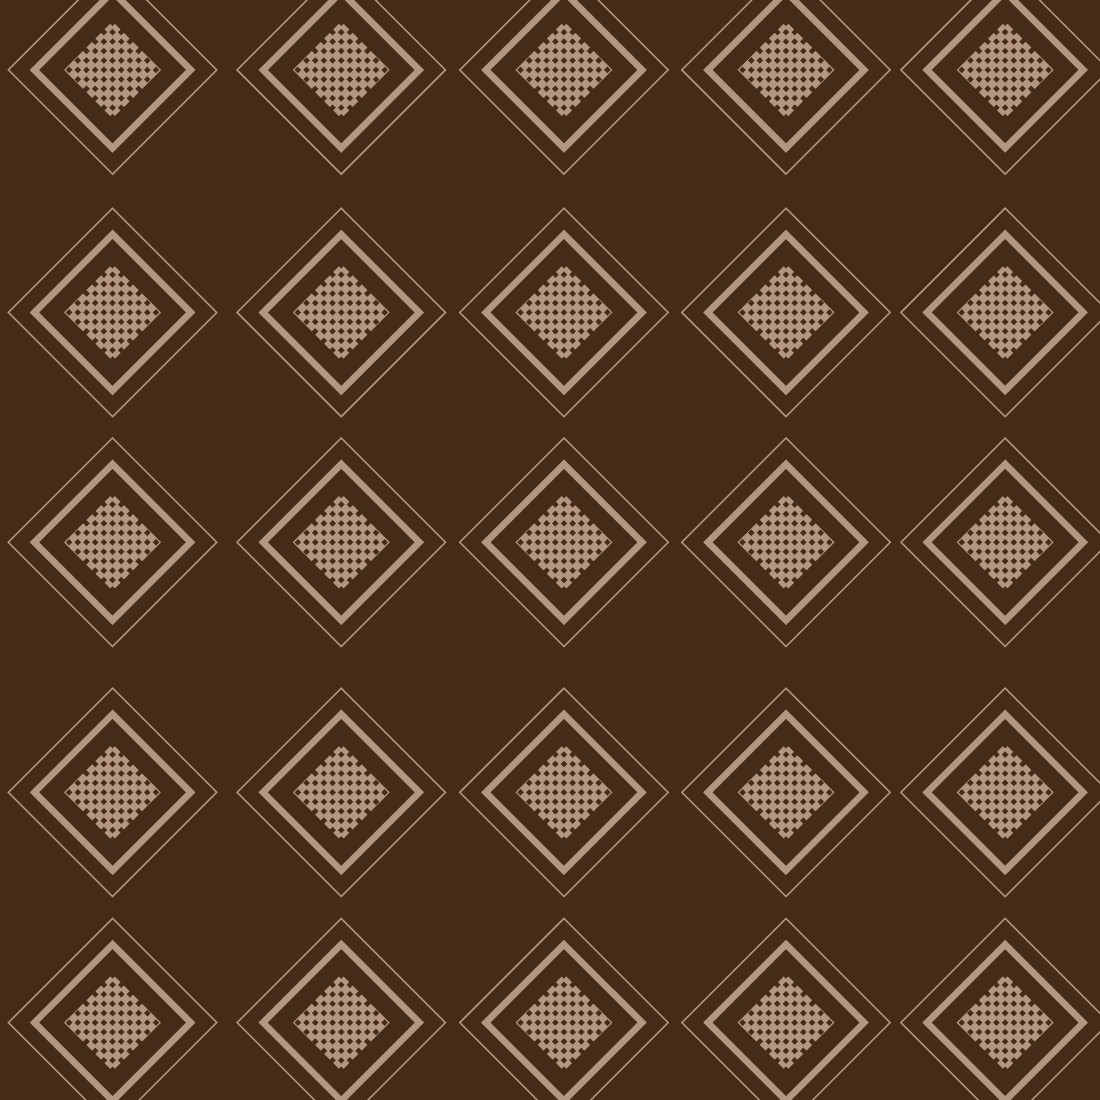 Pattern Design Template in deep brown color.